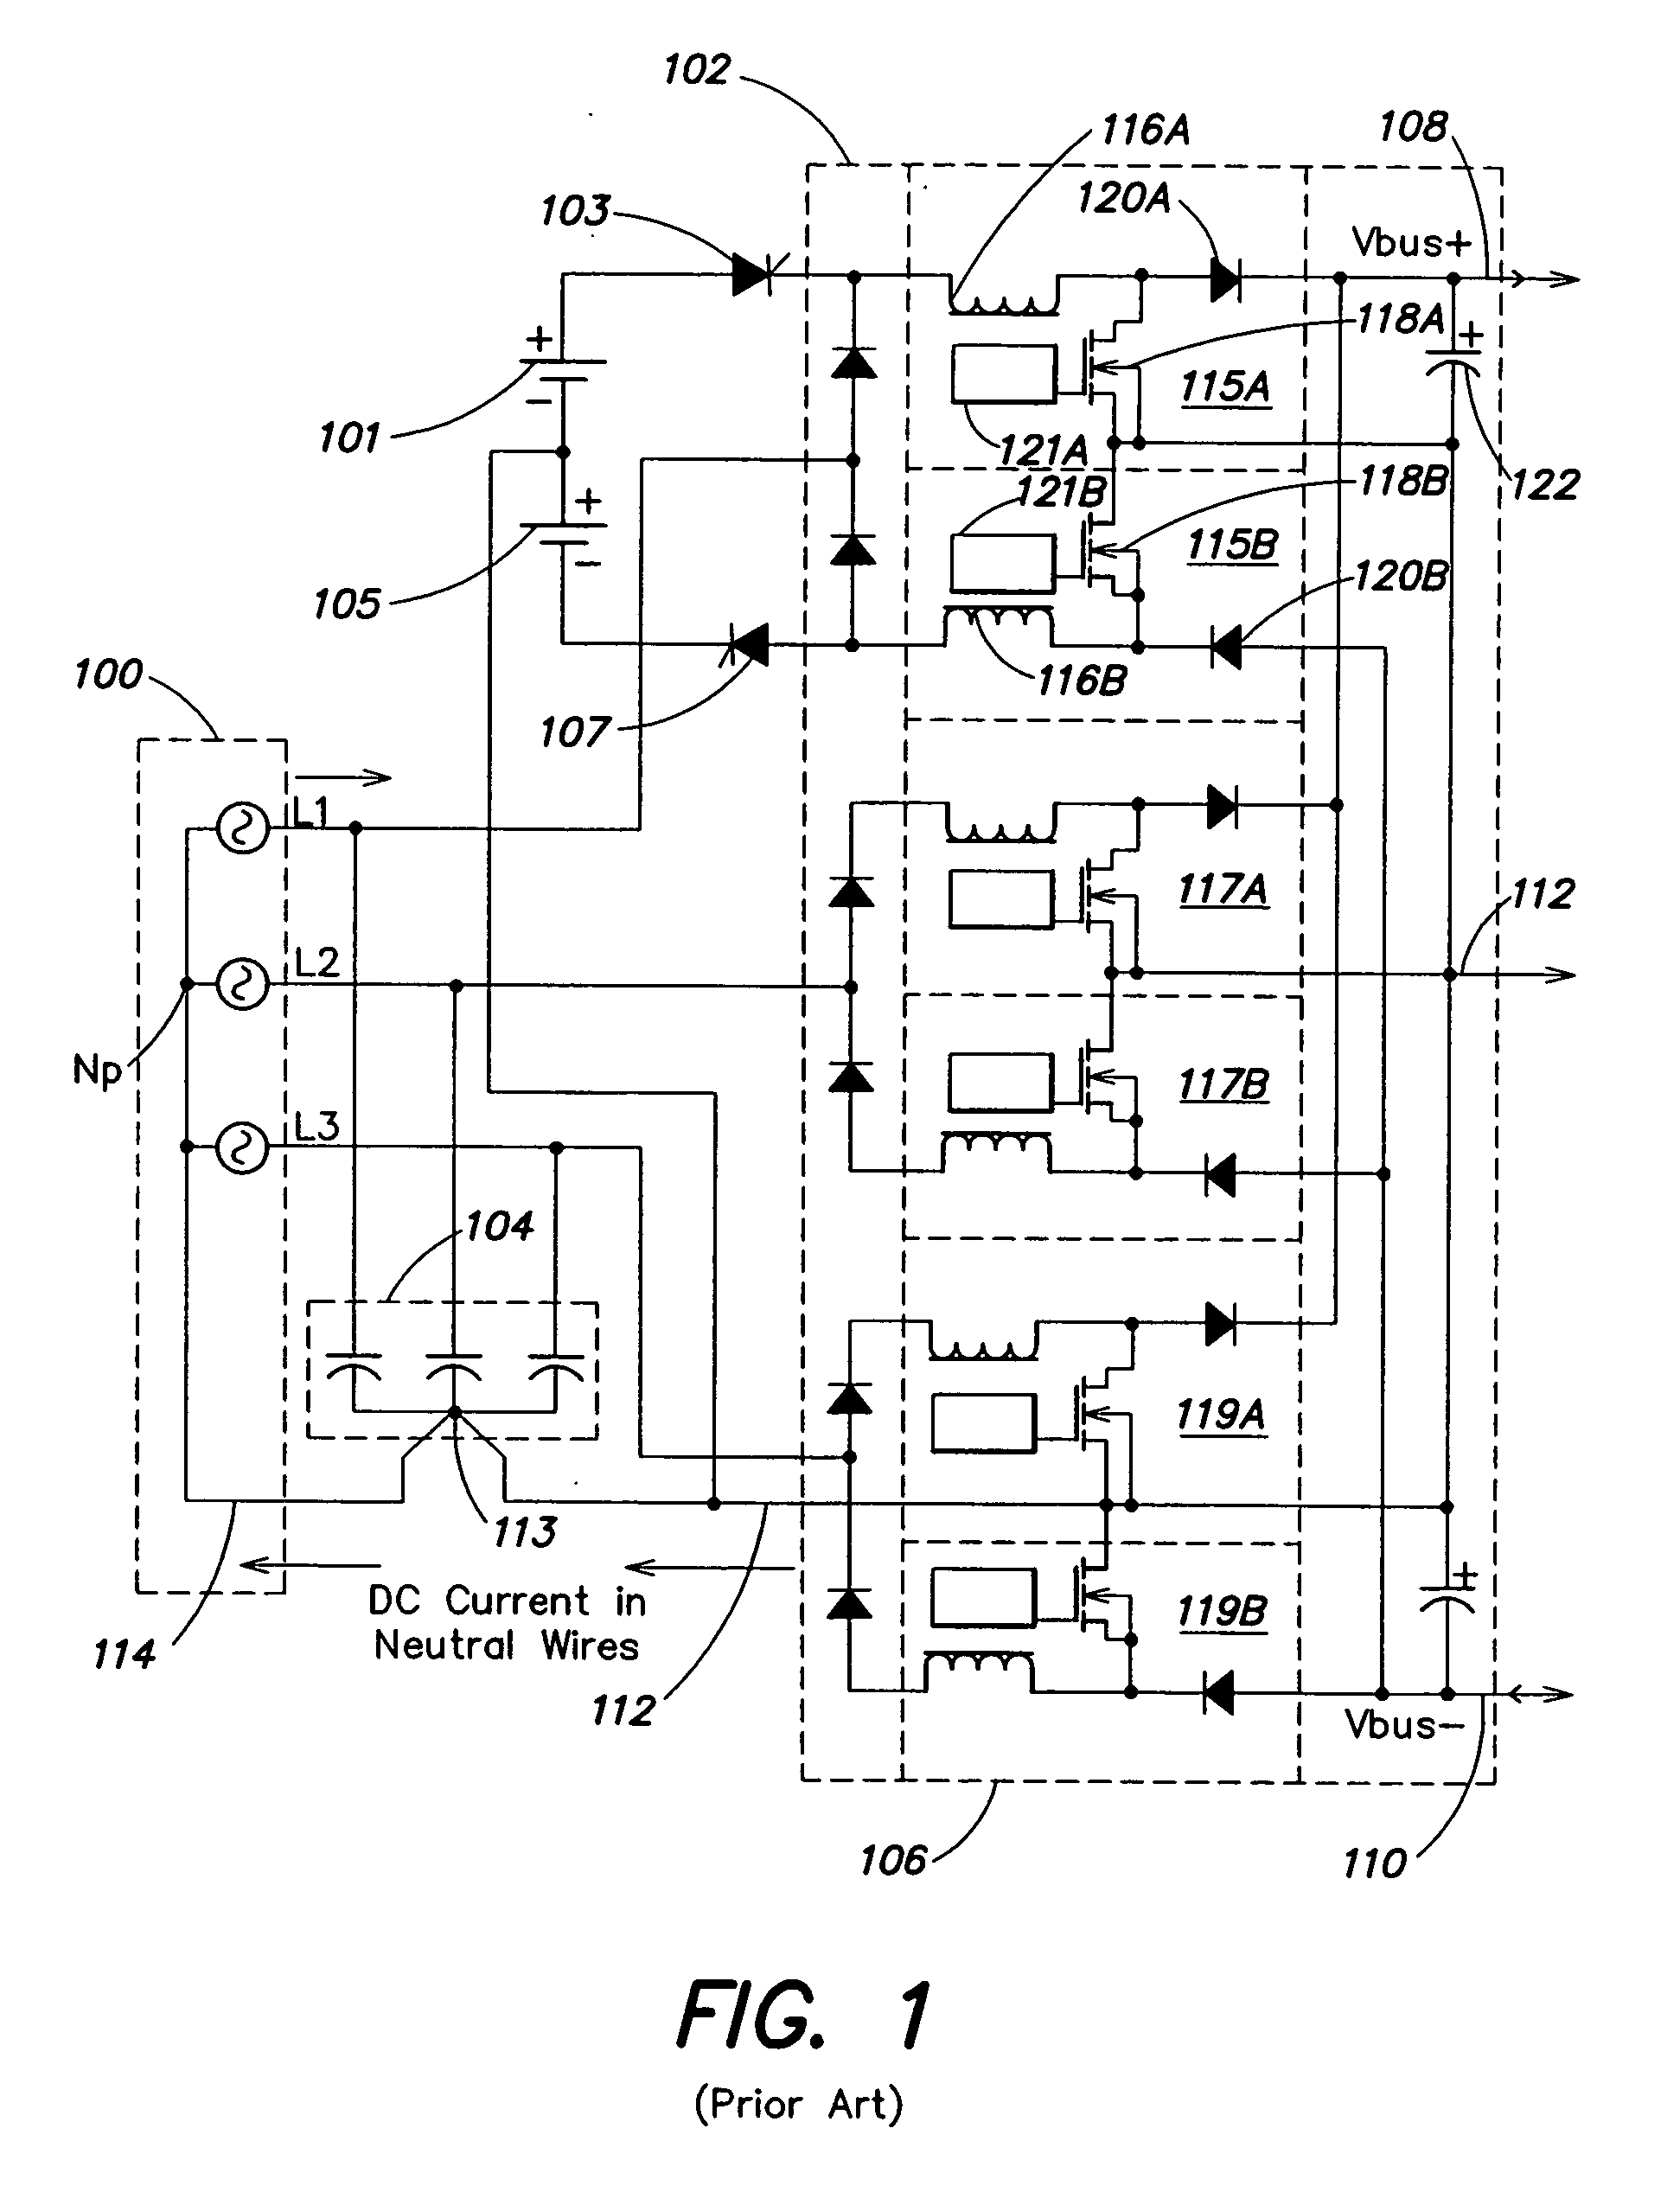 Apparatus for and method of UPS operation